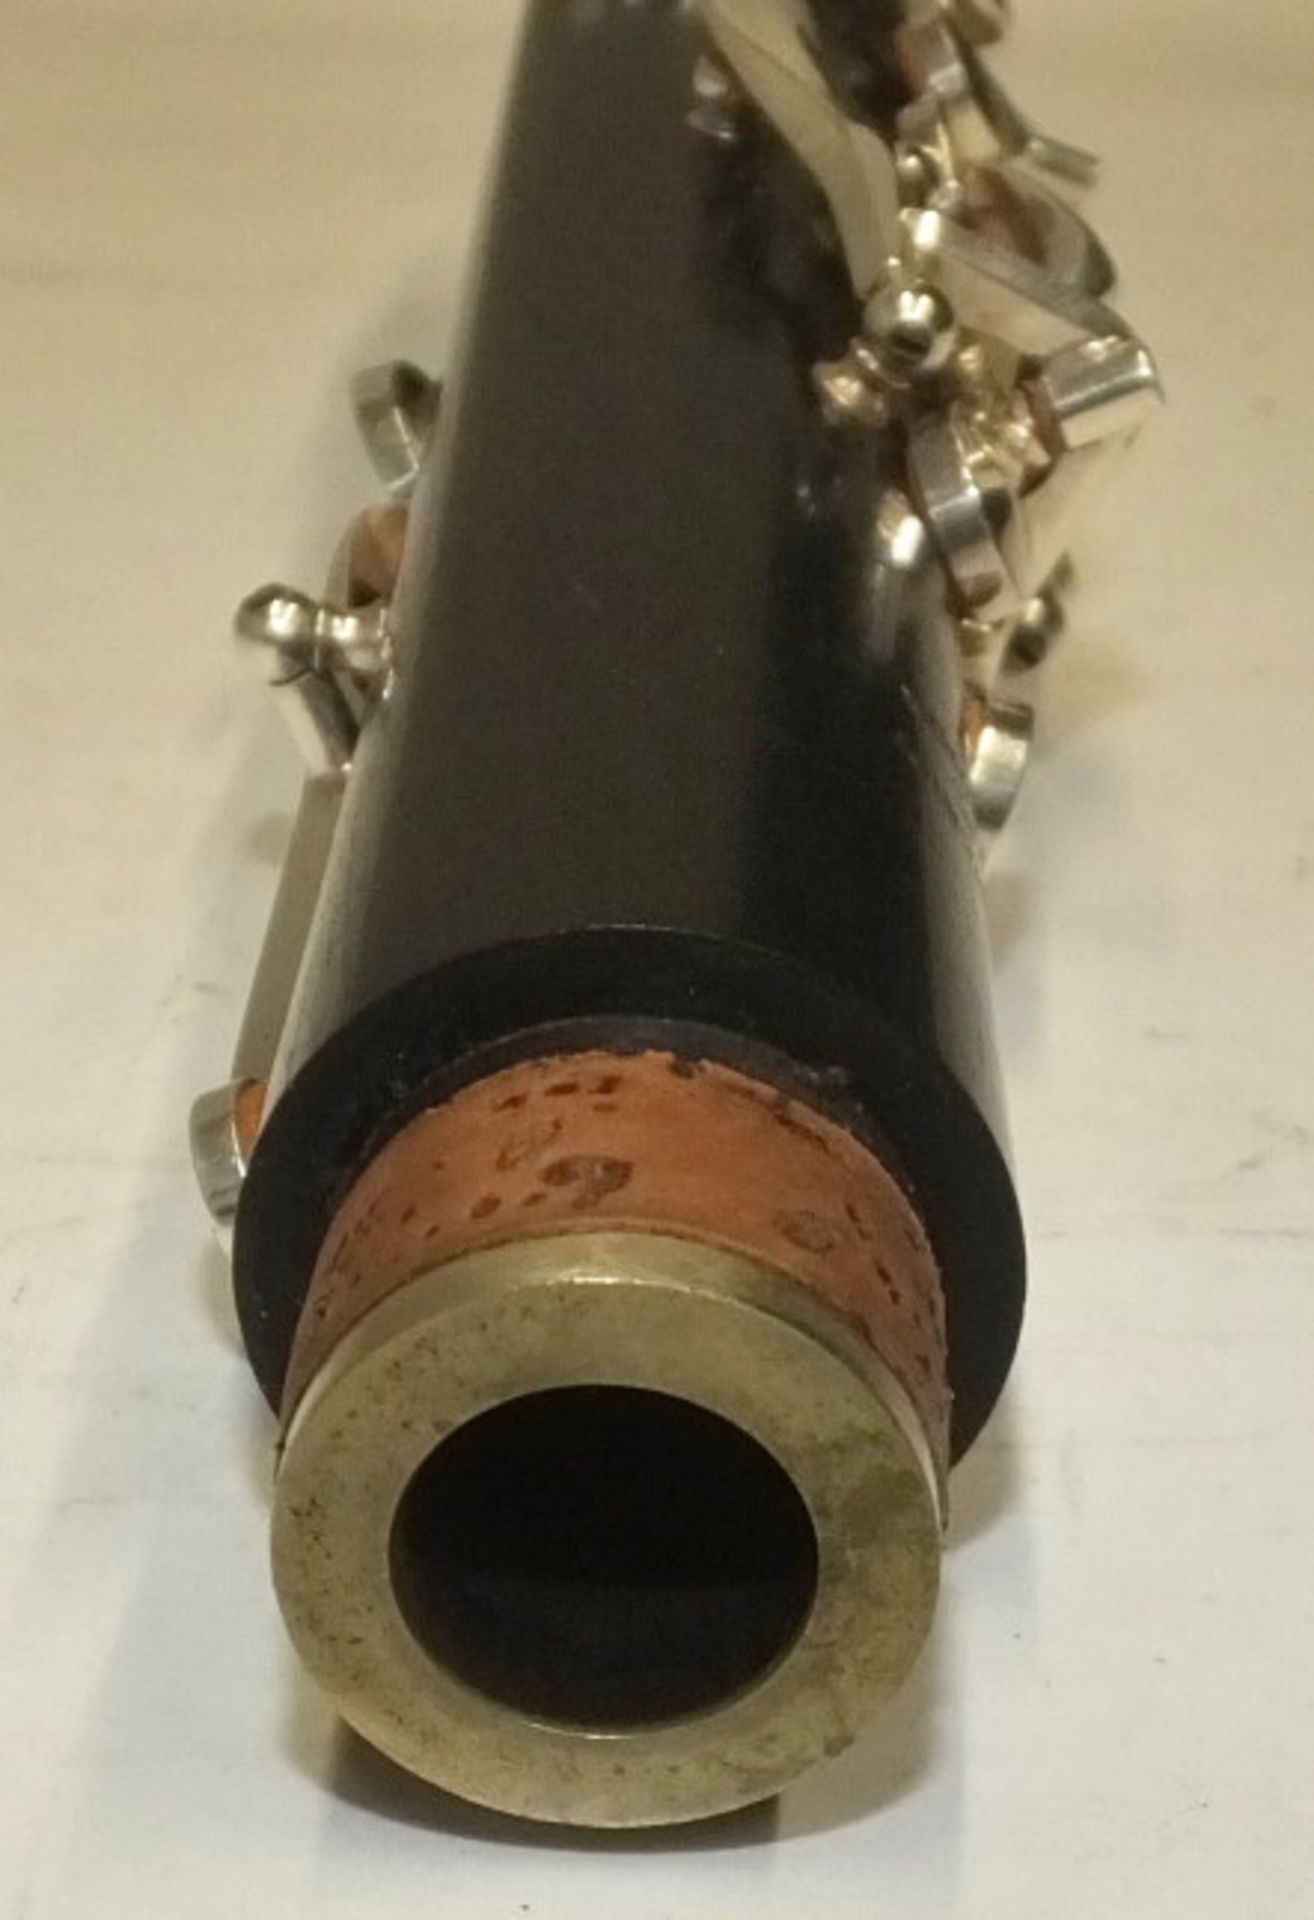 Howarth S2 Clarinet in case - Serial Number - 2228. - Image 6 of 17